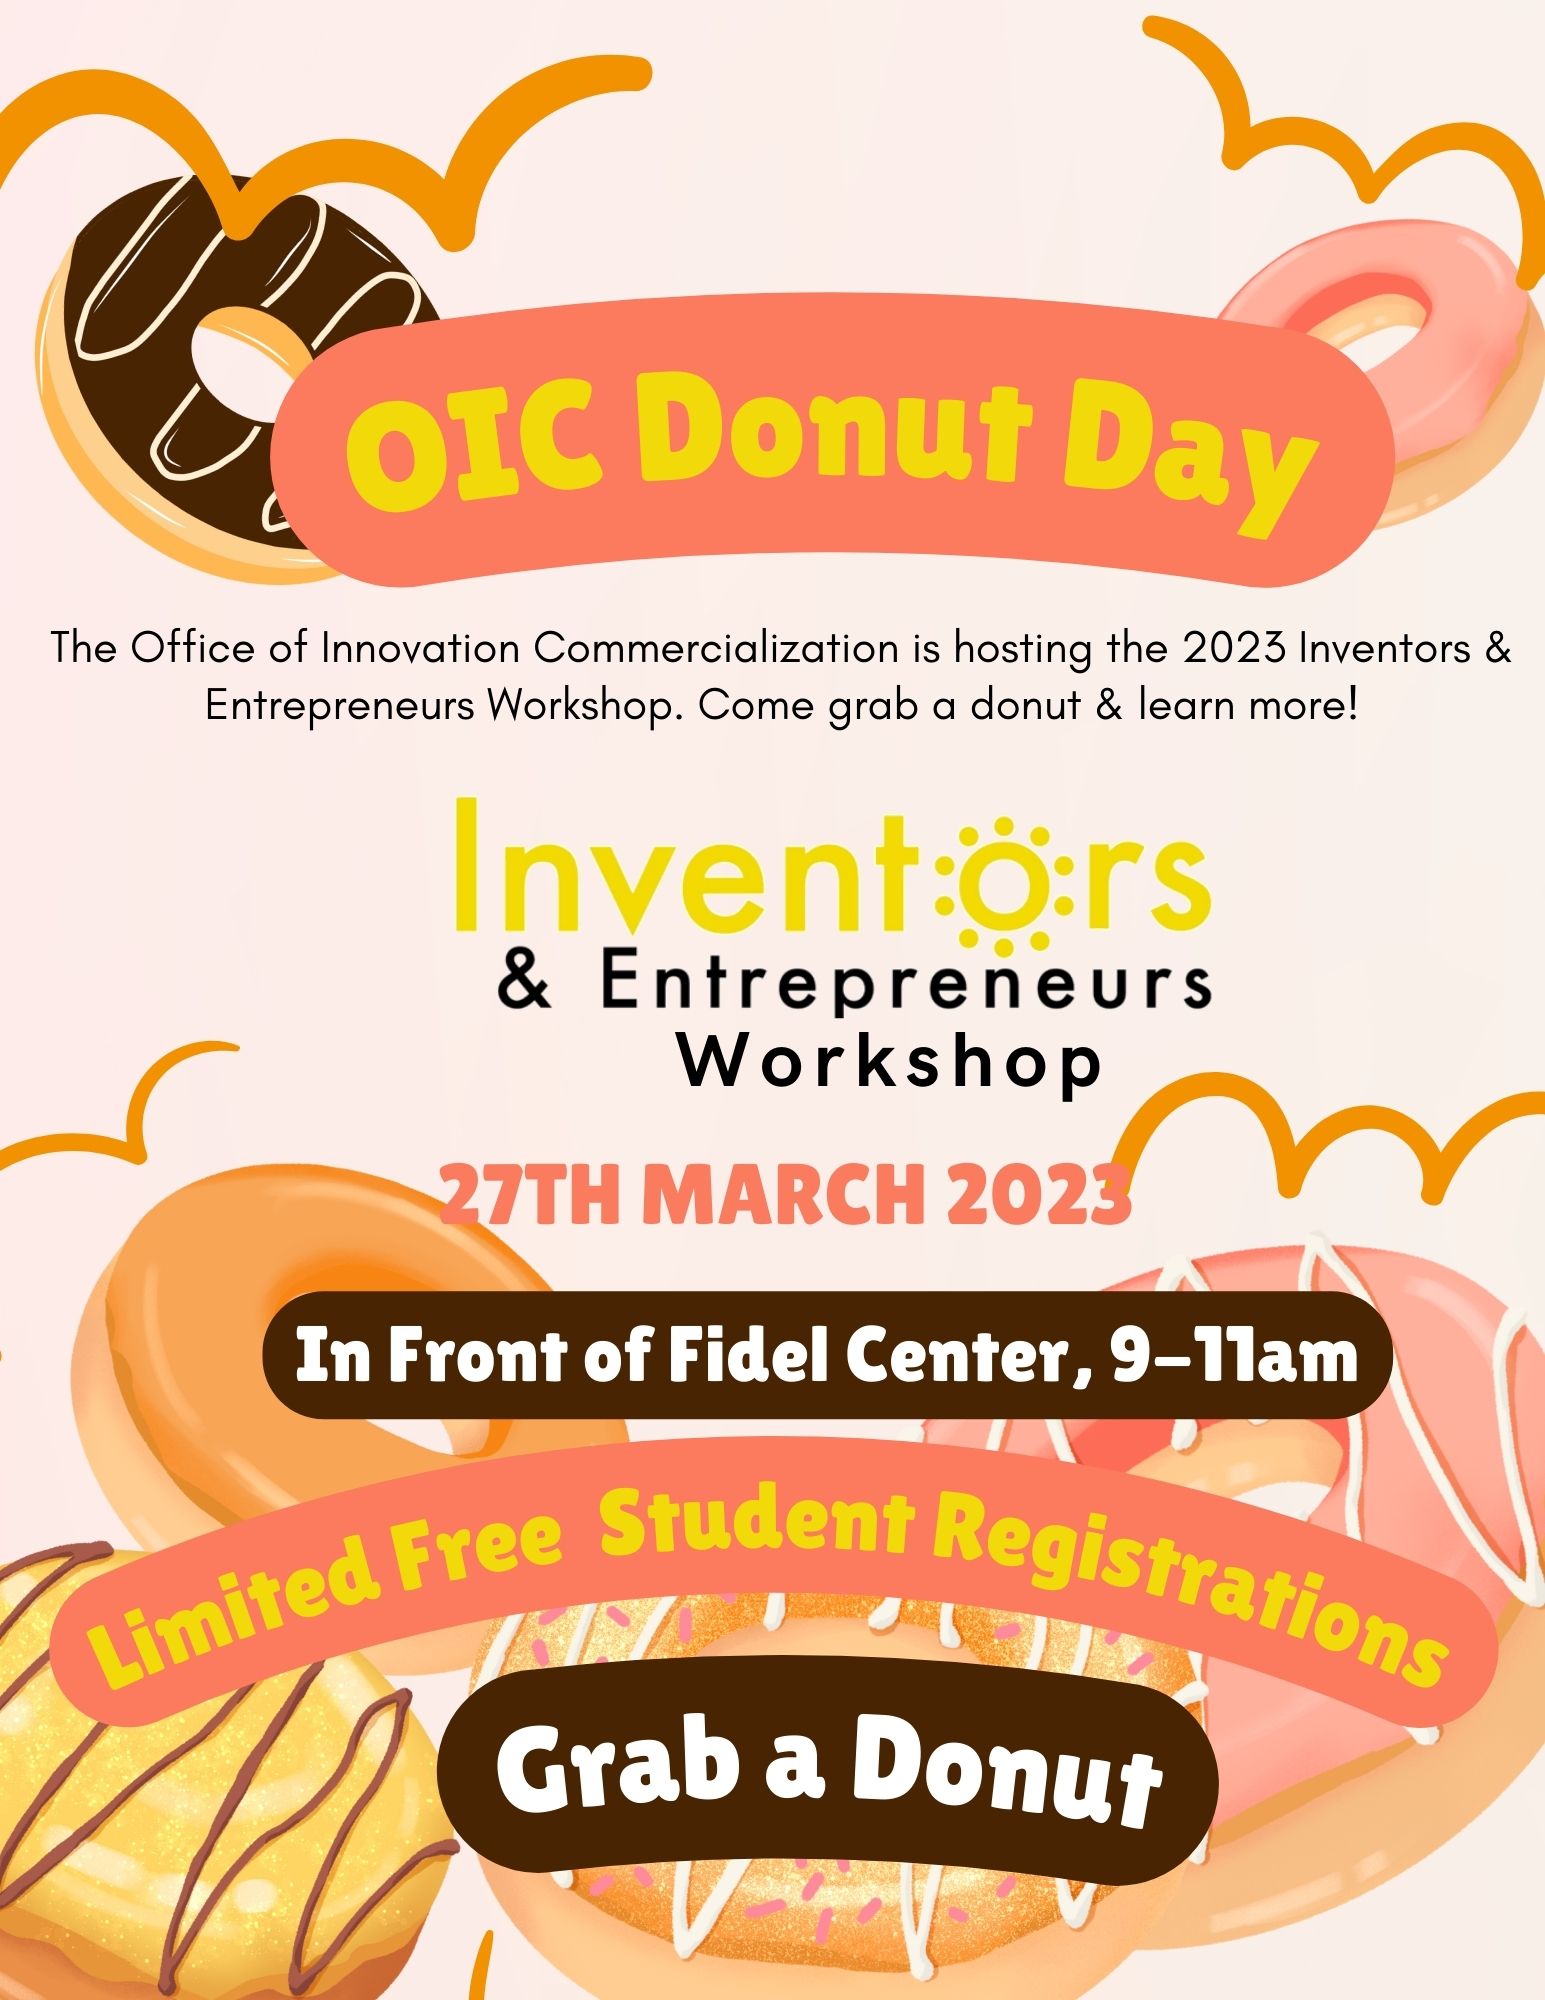 All are invited to join the Office of Innovation and Commercialization info event dubbed "Donut Day" to grab a bite and learn more about our work and your benefits.